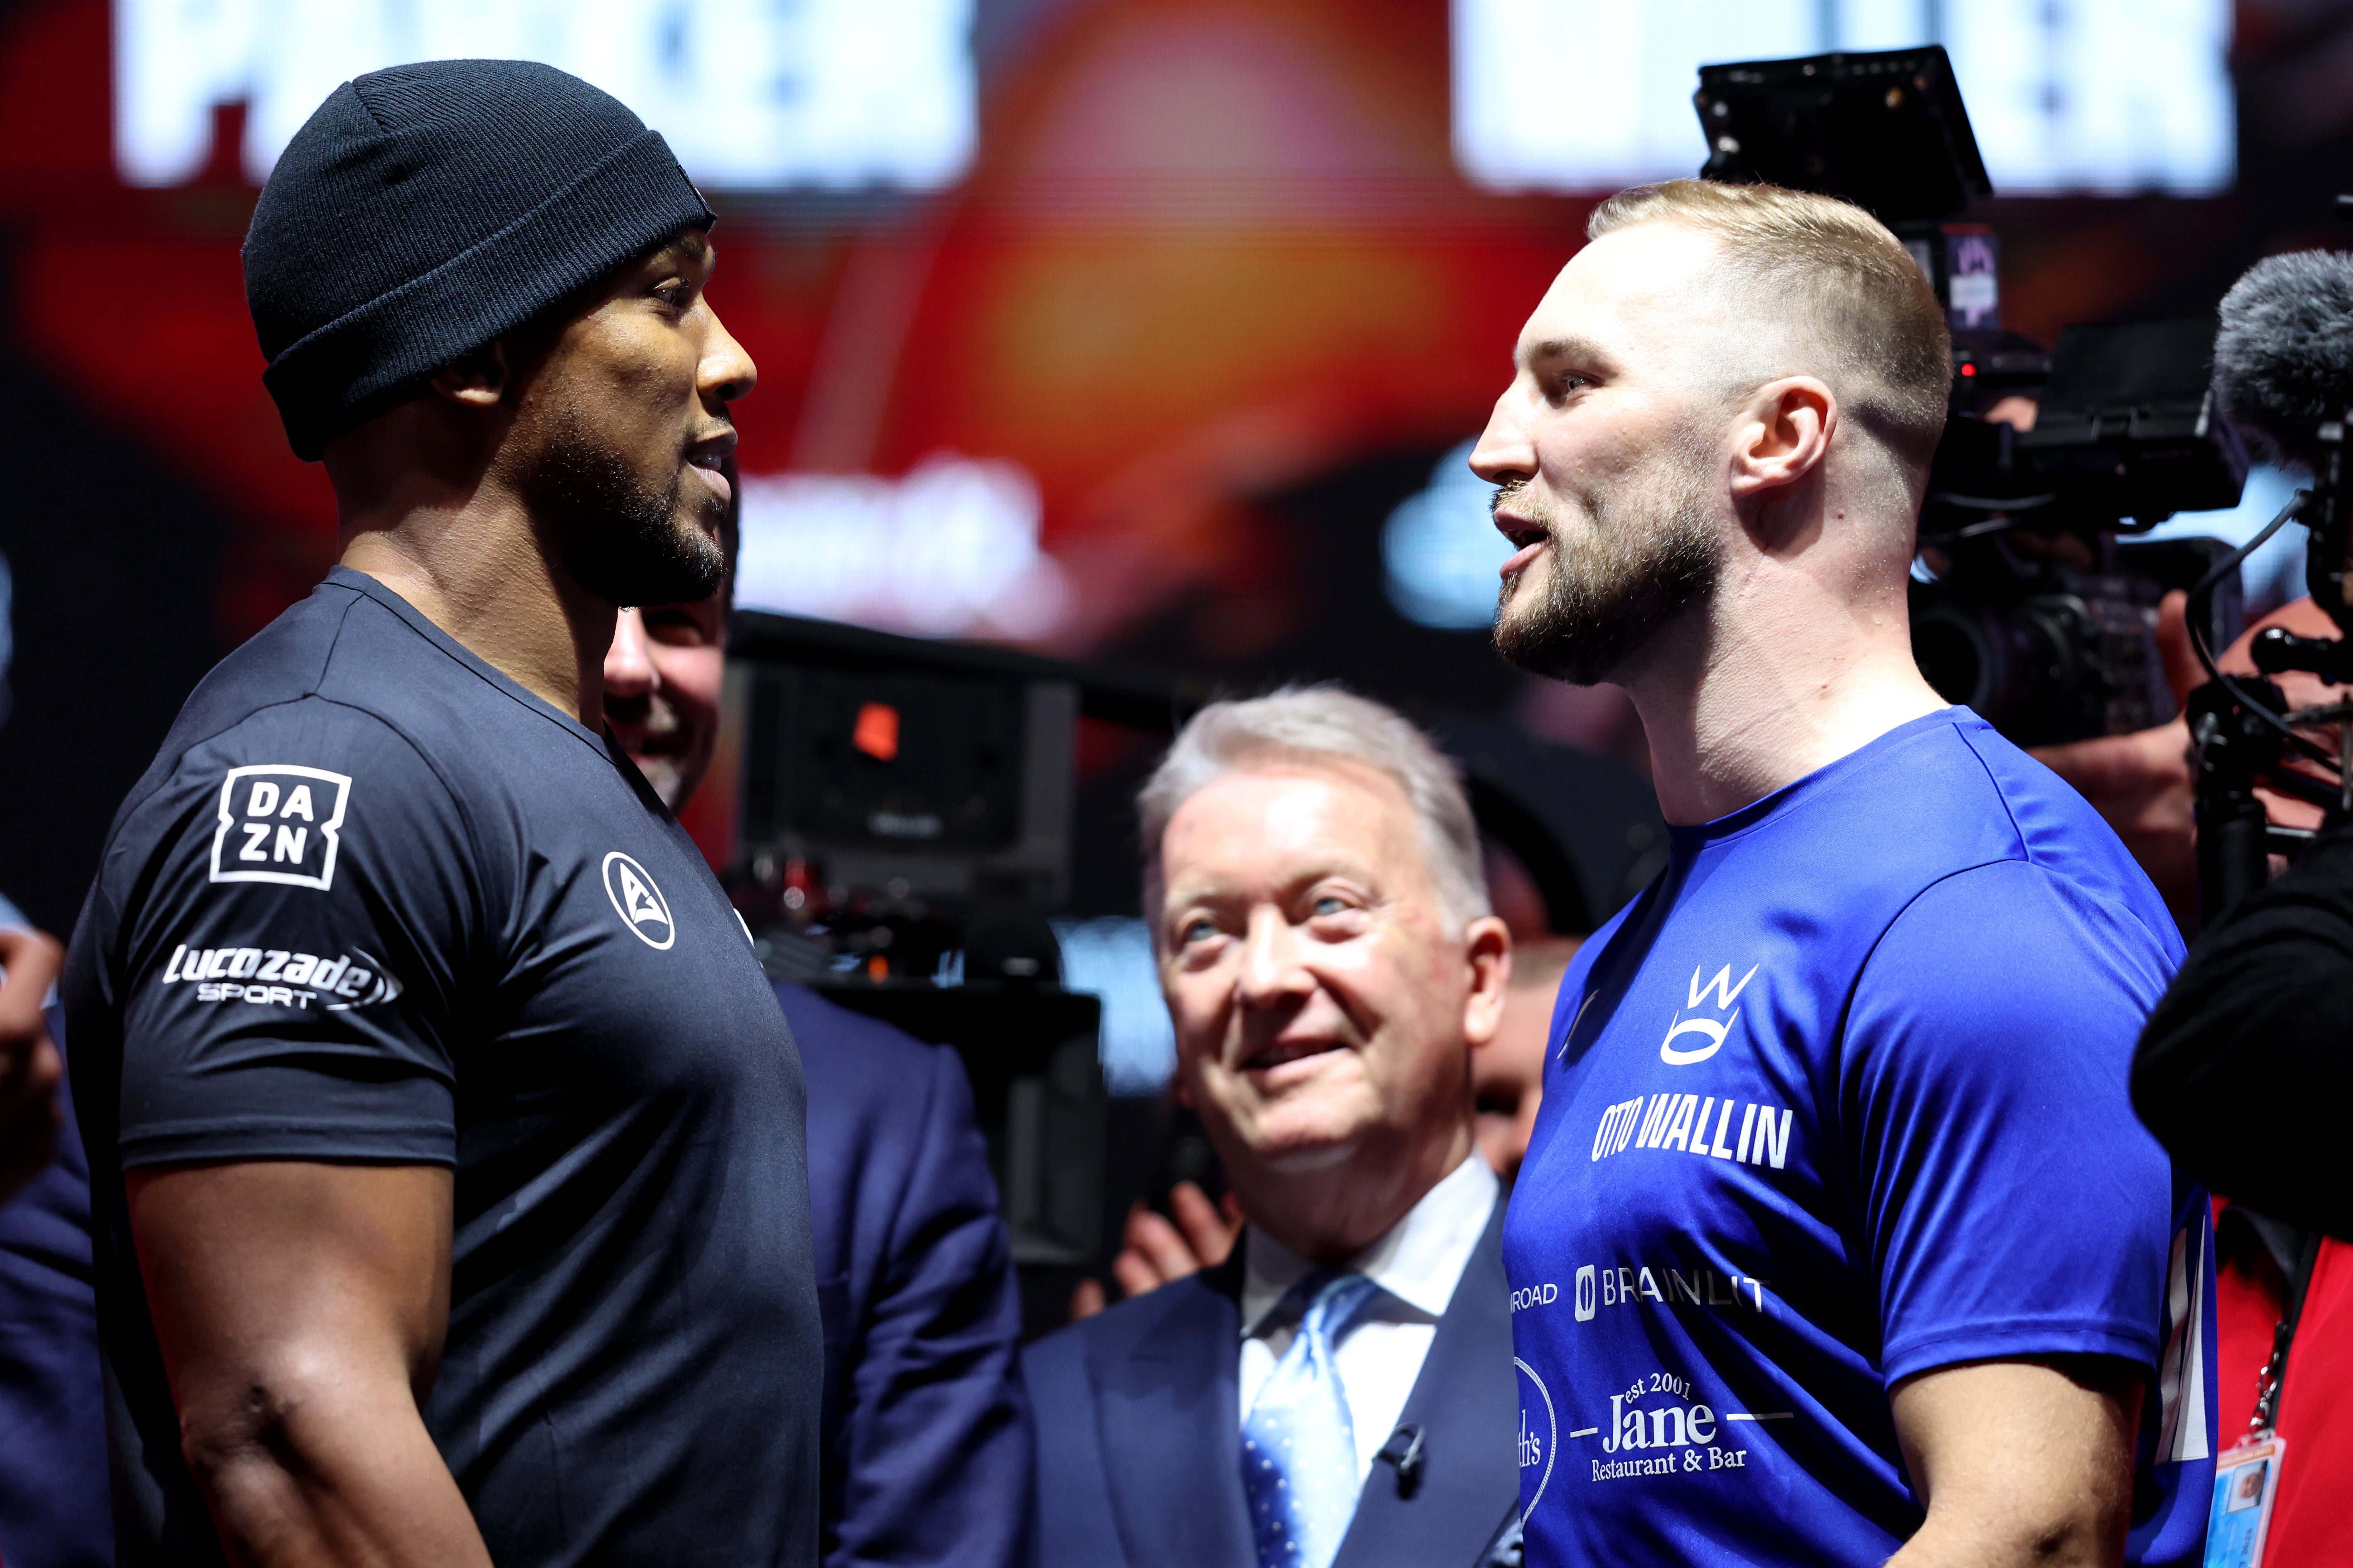 Joshua faces off with Otto Wallin, whom he beat twice in the amateurs and later sparred with